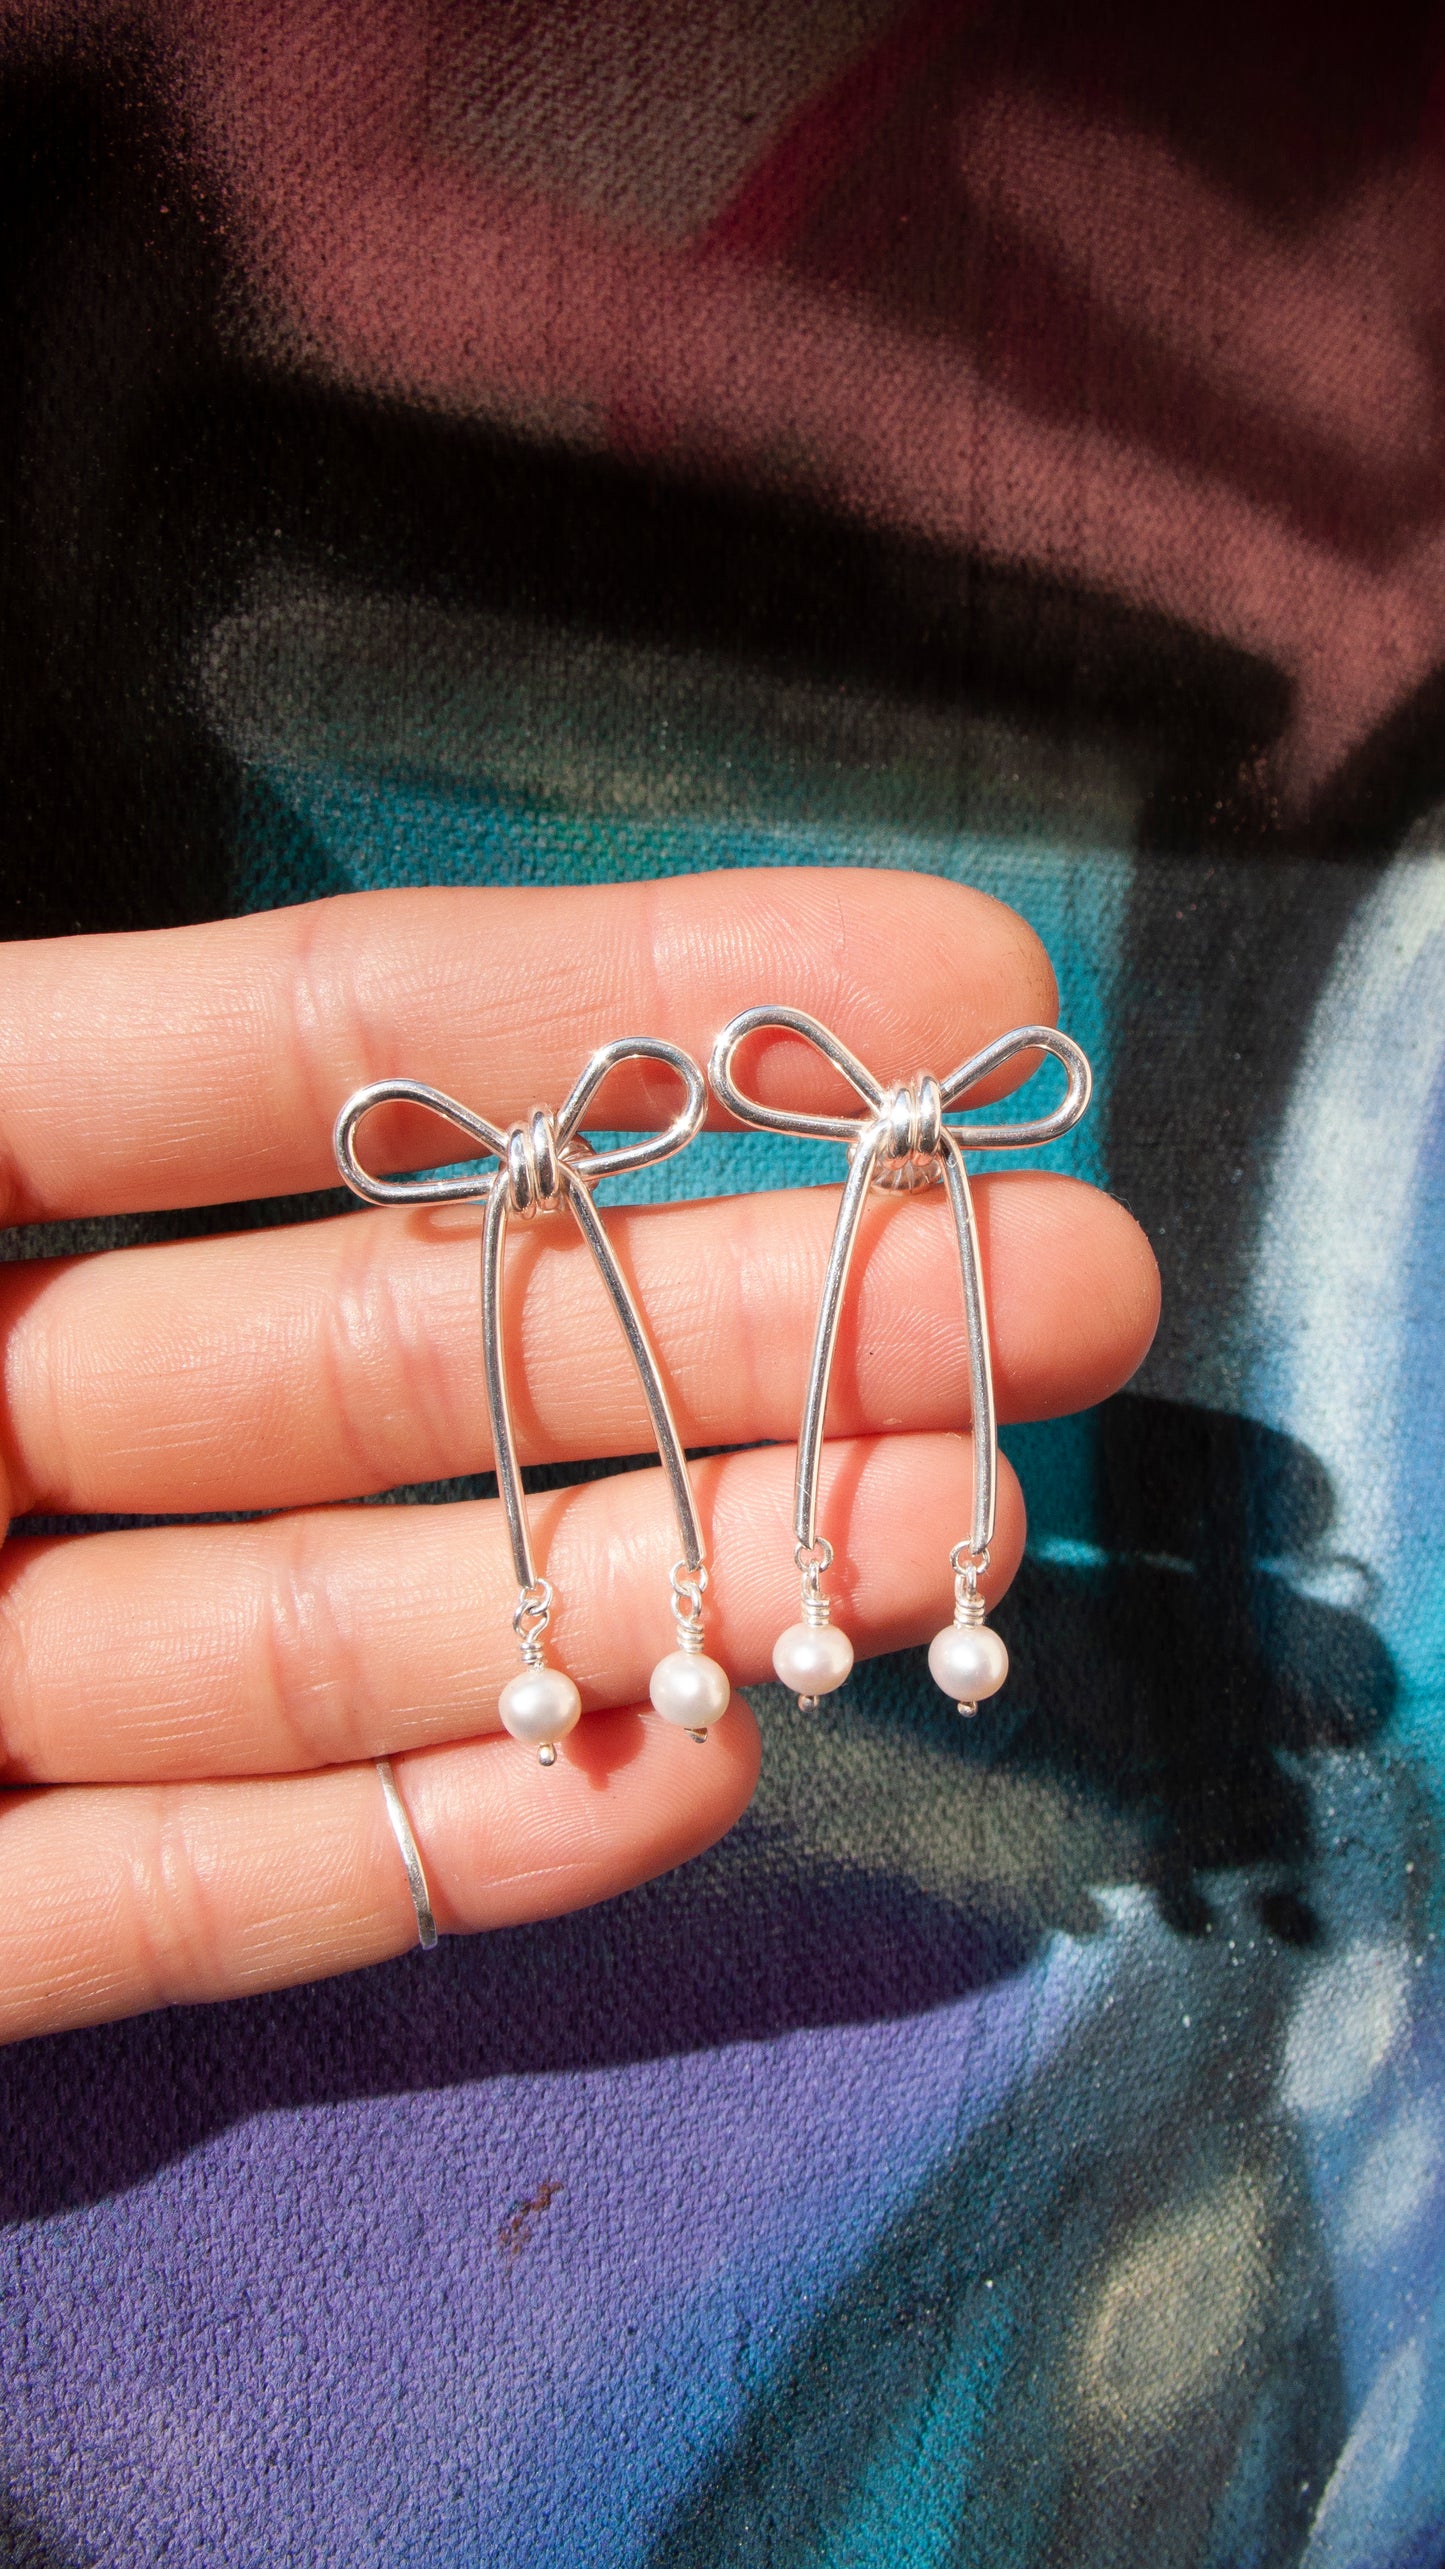 Silver Bow Stud Earrings With Pearls!